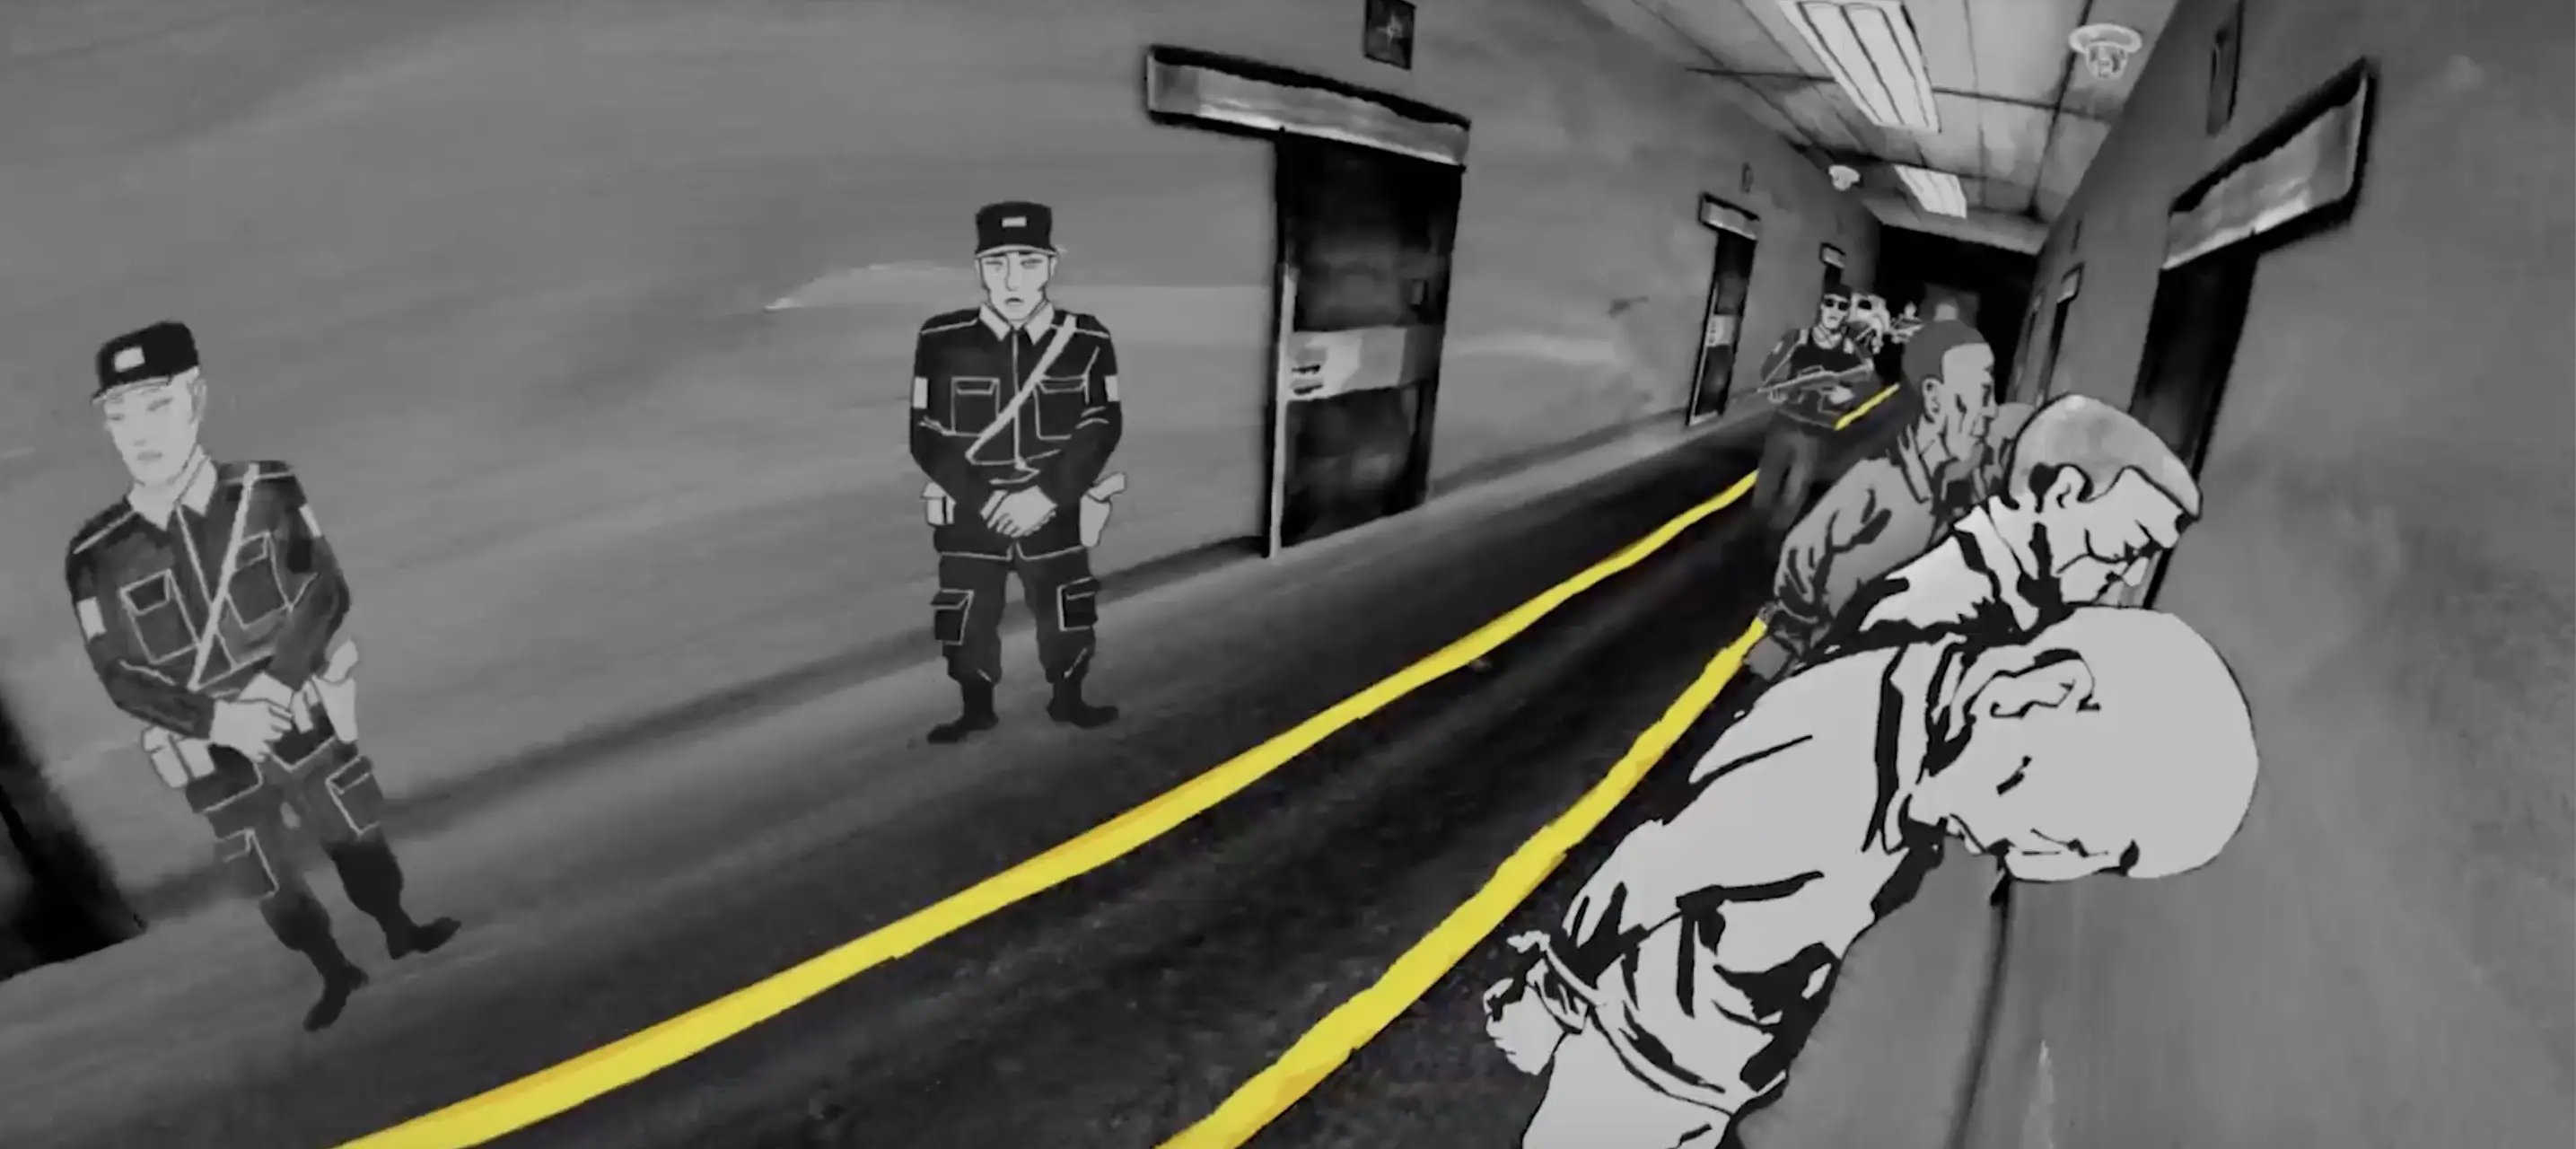 Illustration of detained men lined up facing a wall, with guards standing on the other side of the hallway.  Two yellow lines mark the floor.